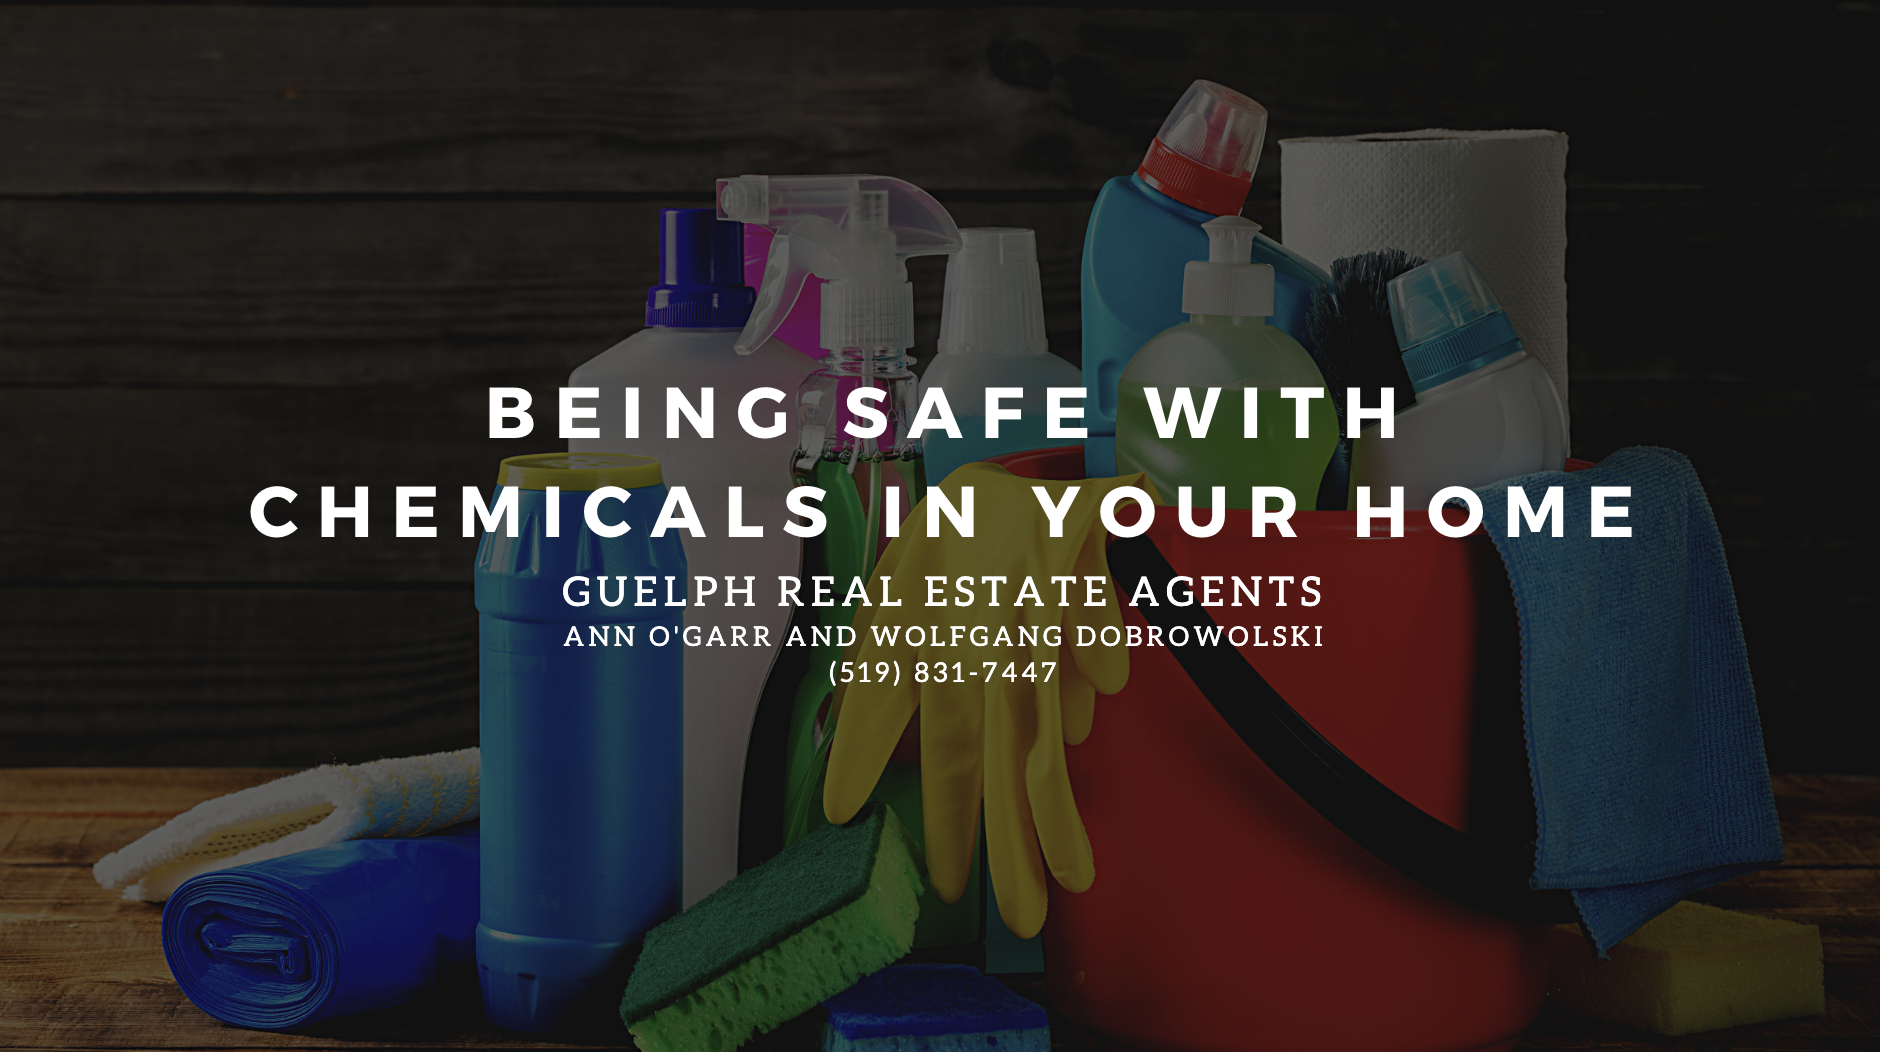 Guelph Real Estate Agents - Being Safe with Chemicals in Your Home